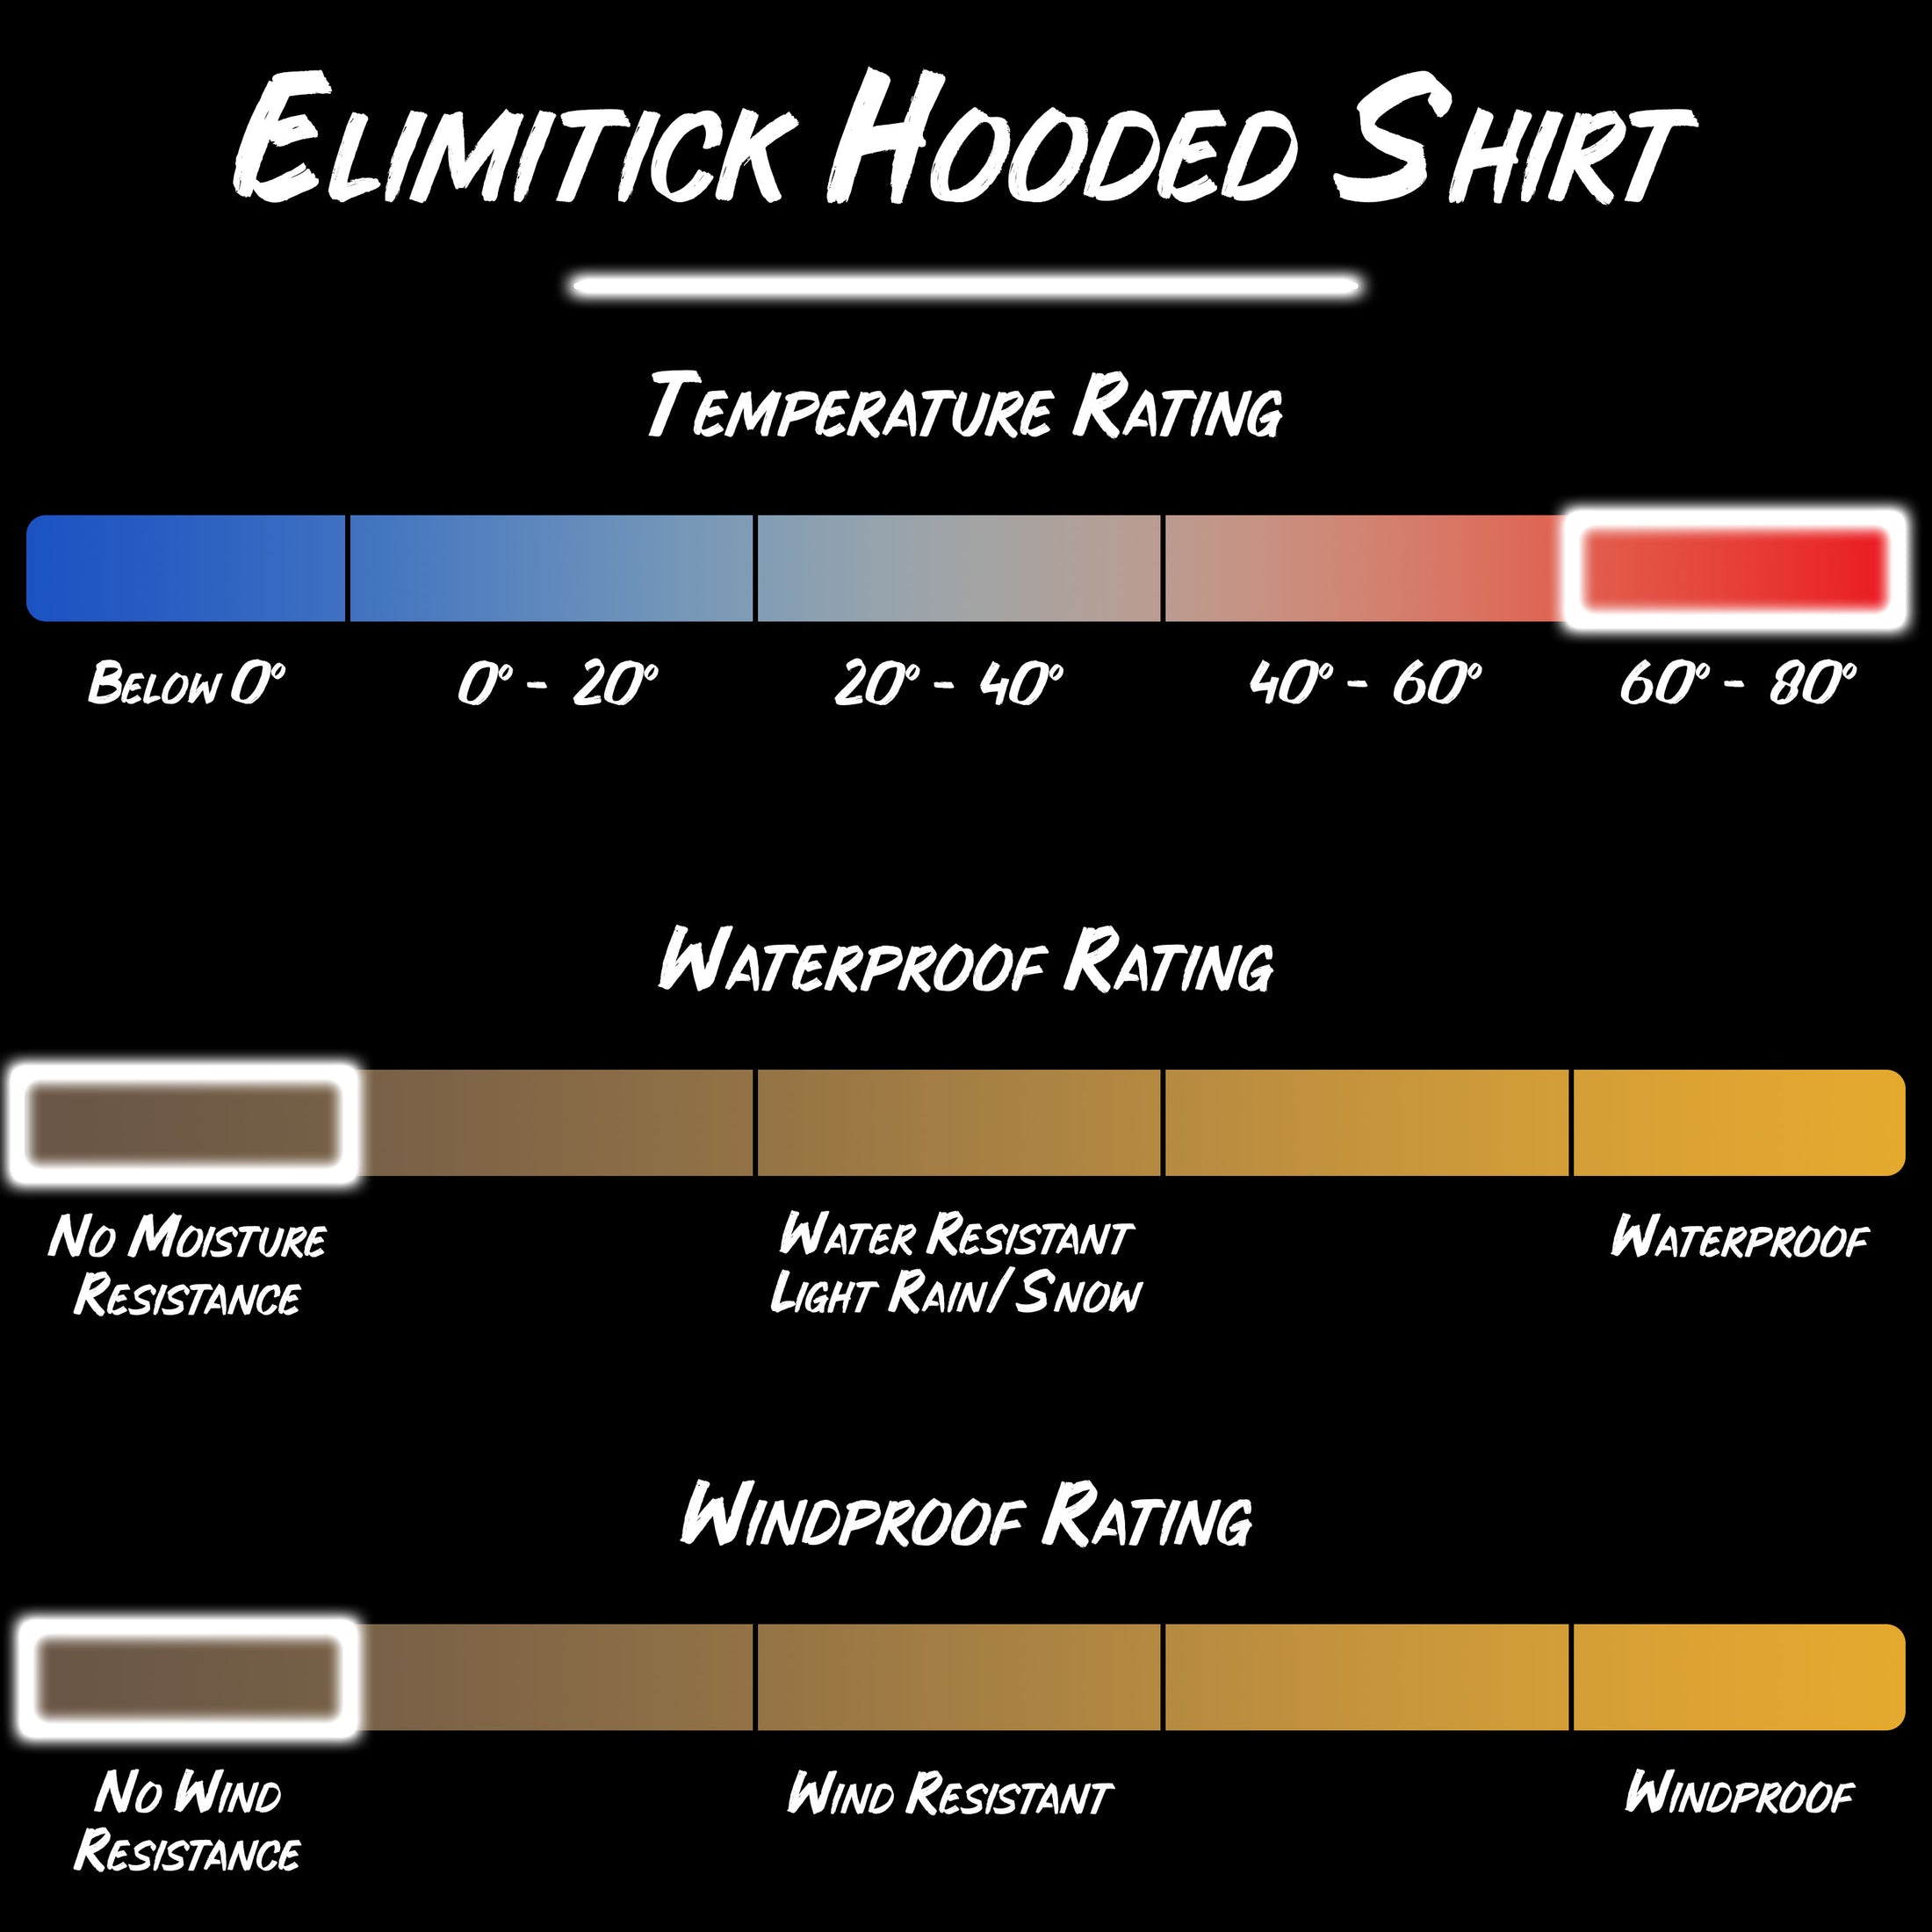 Elimitick lightweight hooded shirt product specifications